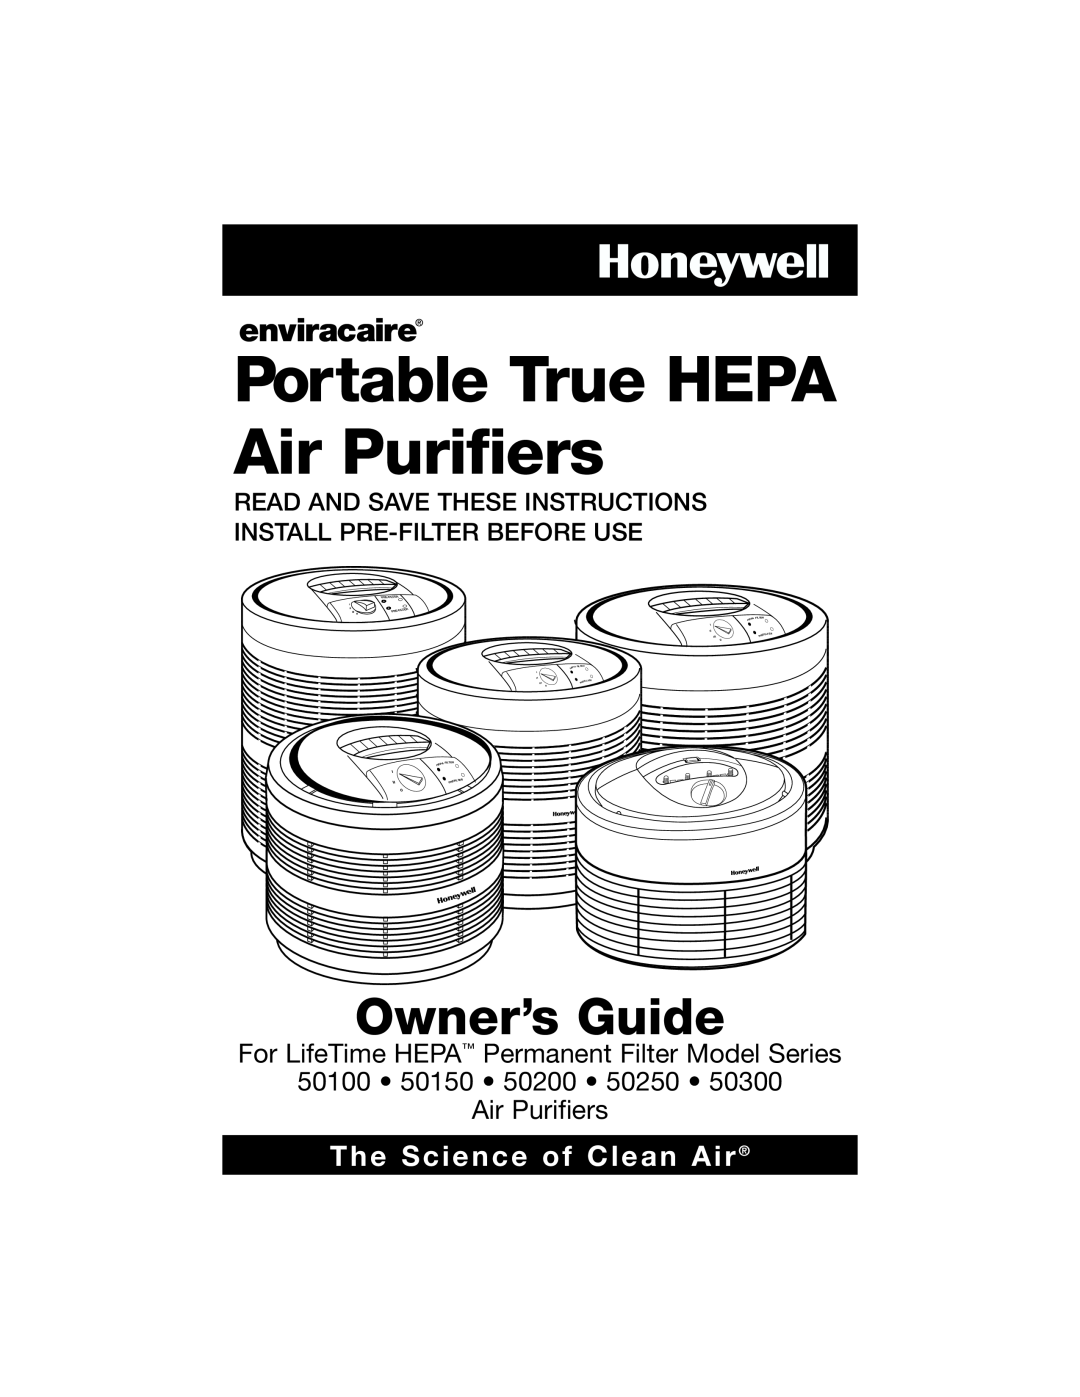 Honeywell 50300, 50100 manual Portable True HEPA Air Purifiers, Owner’s Guide, The Science of Clean Air, I, Hepa, Filter 